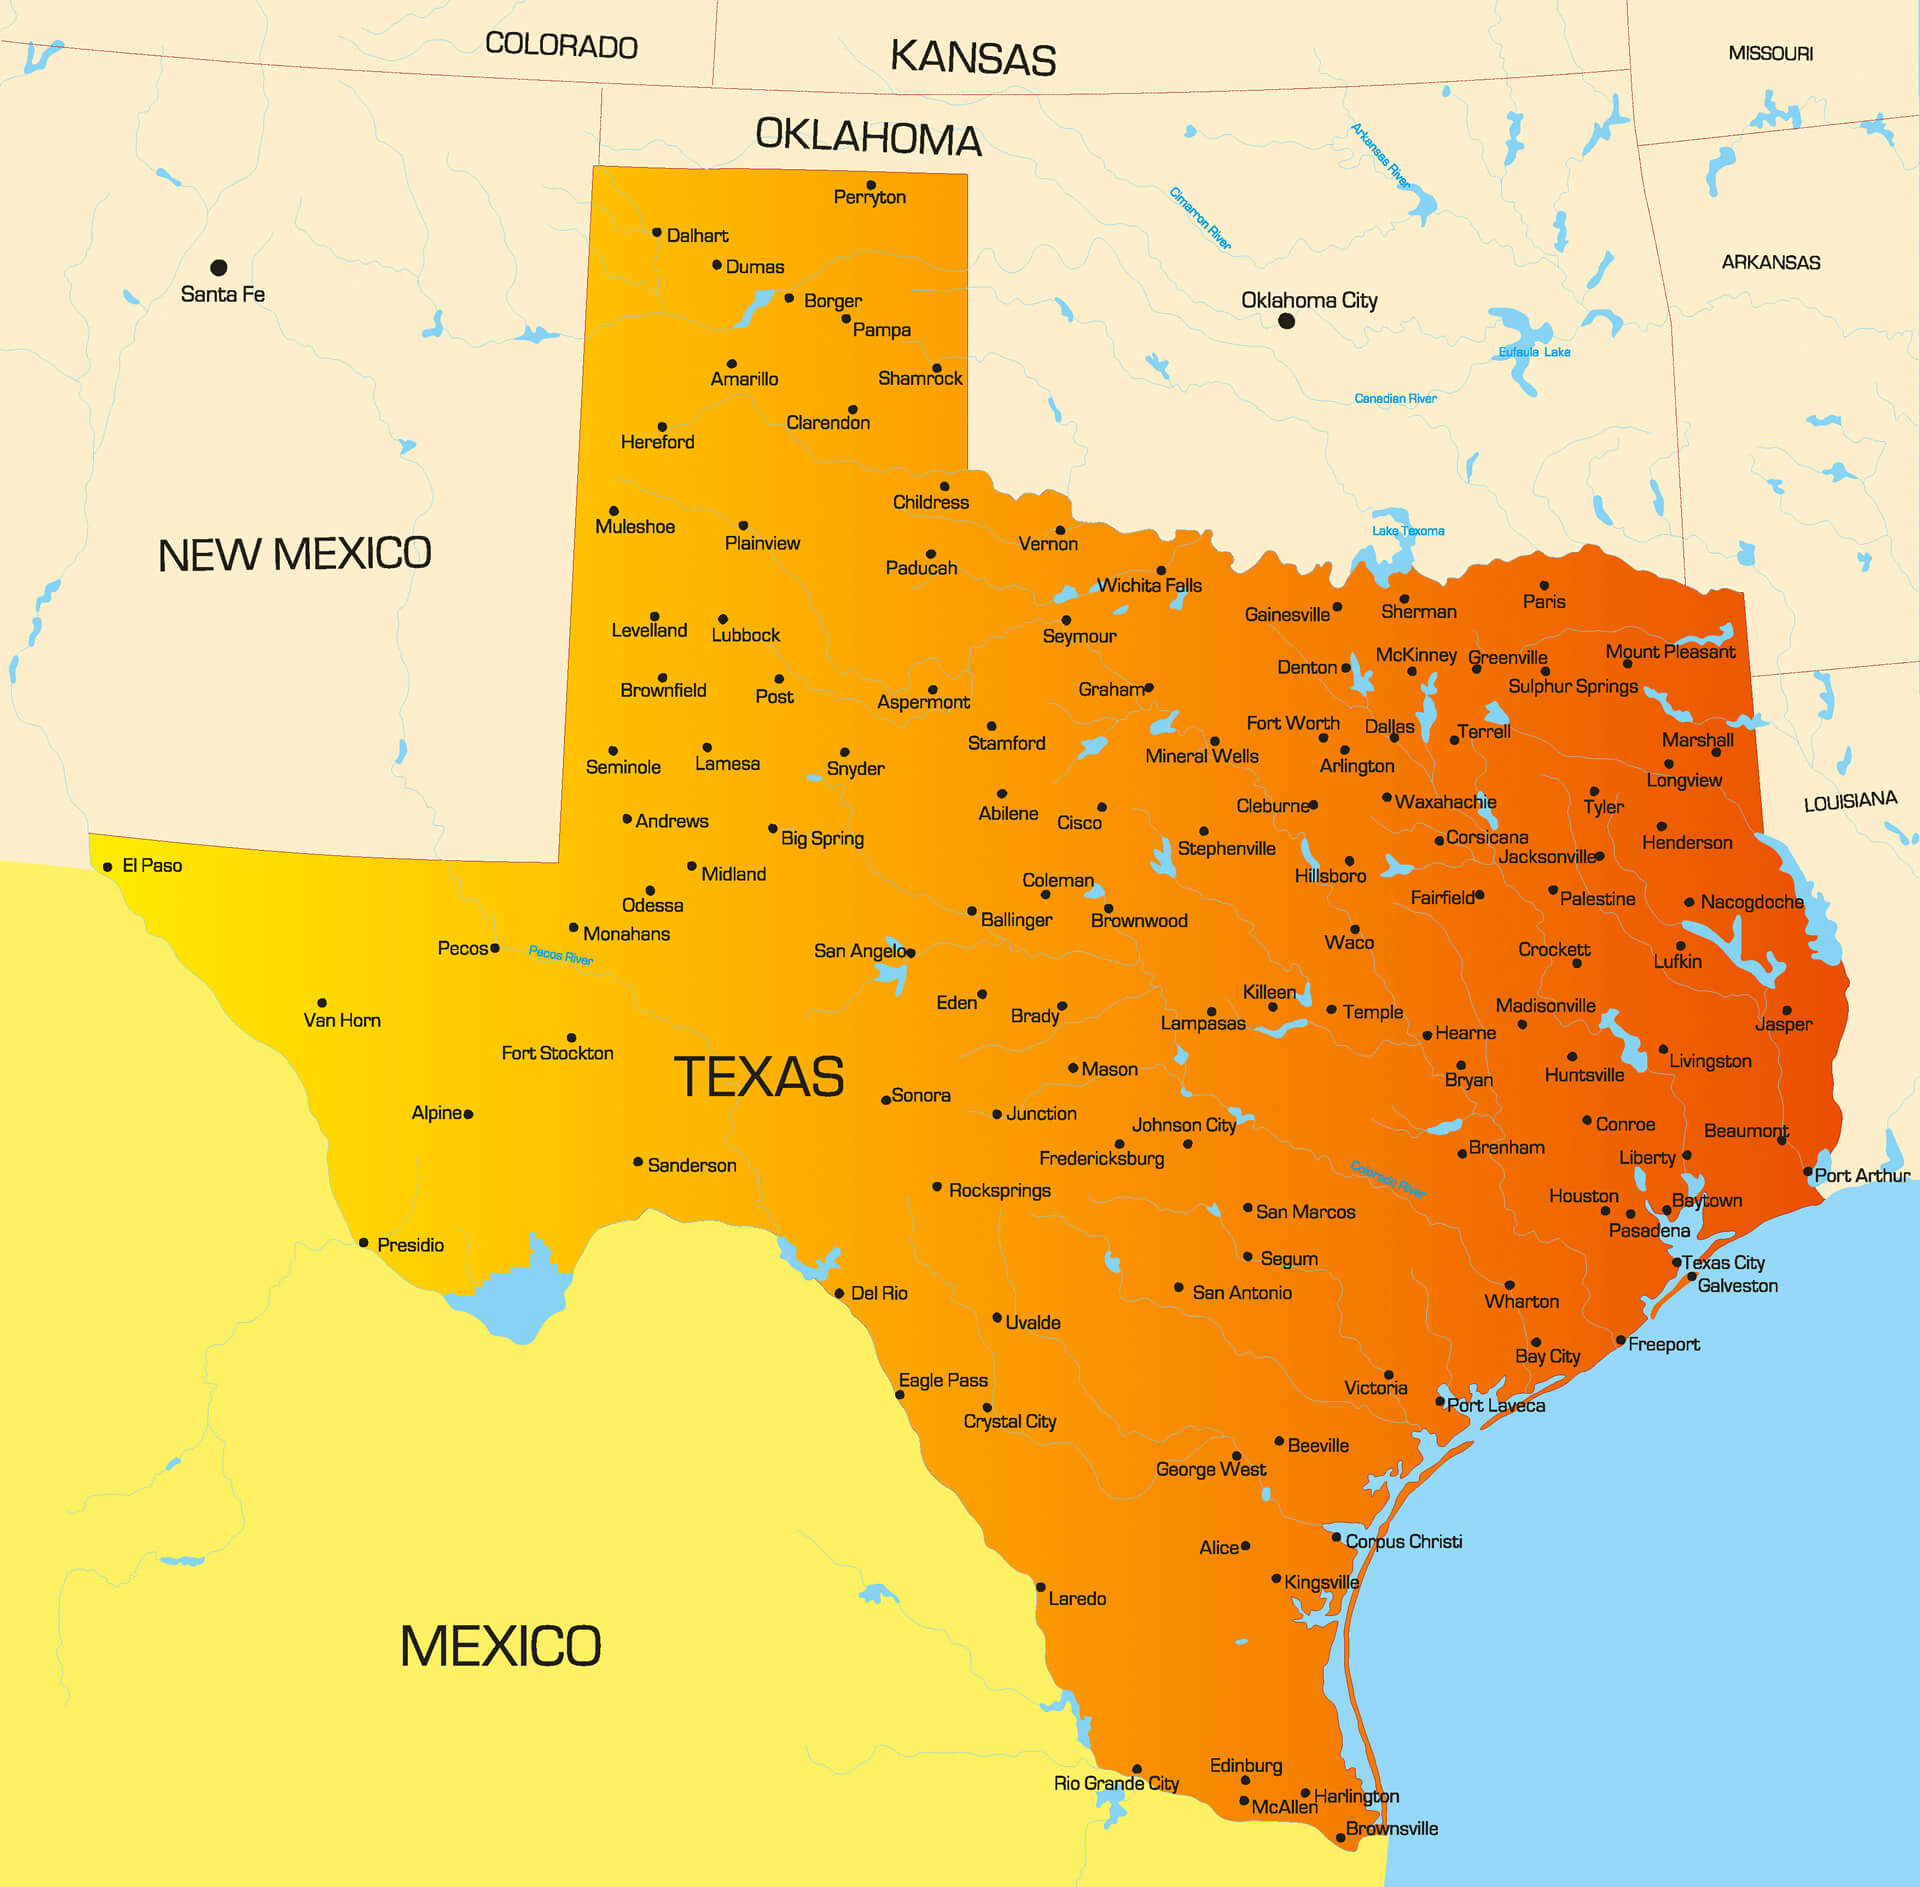 Where is Texas located on the Map?